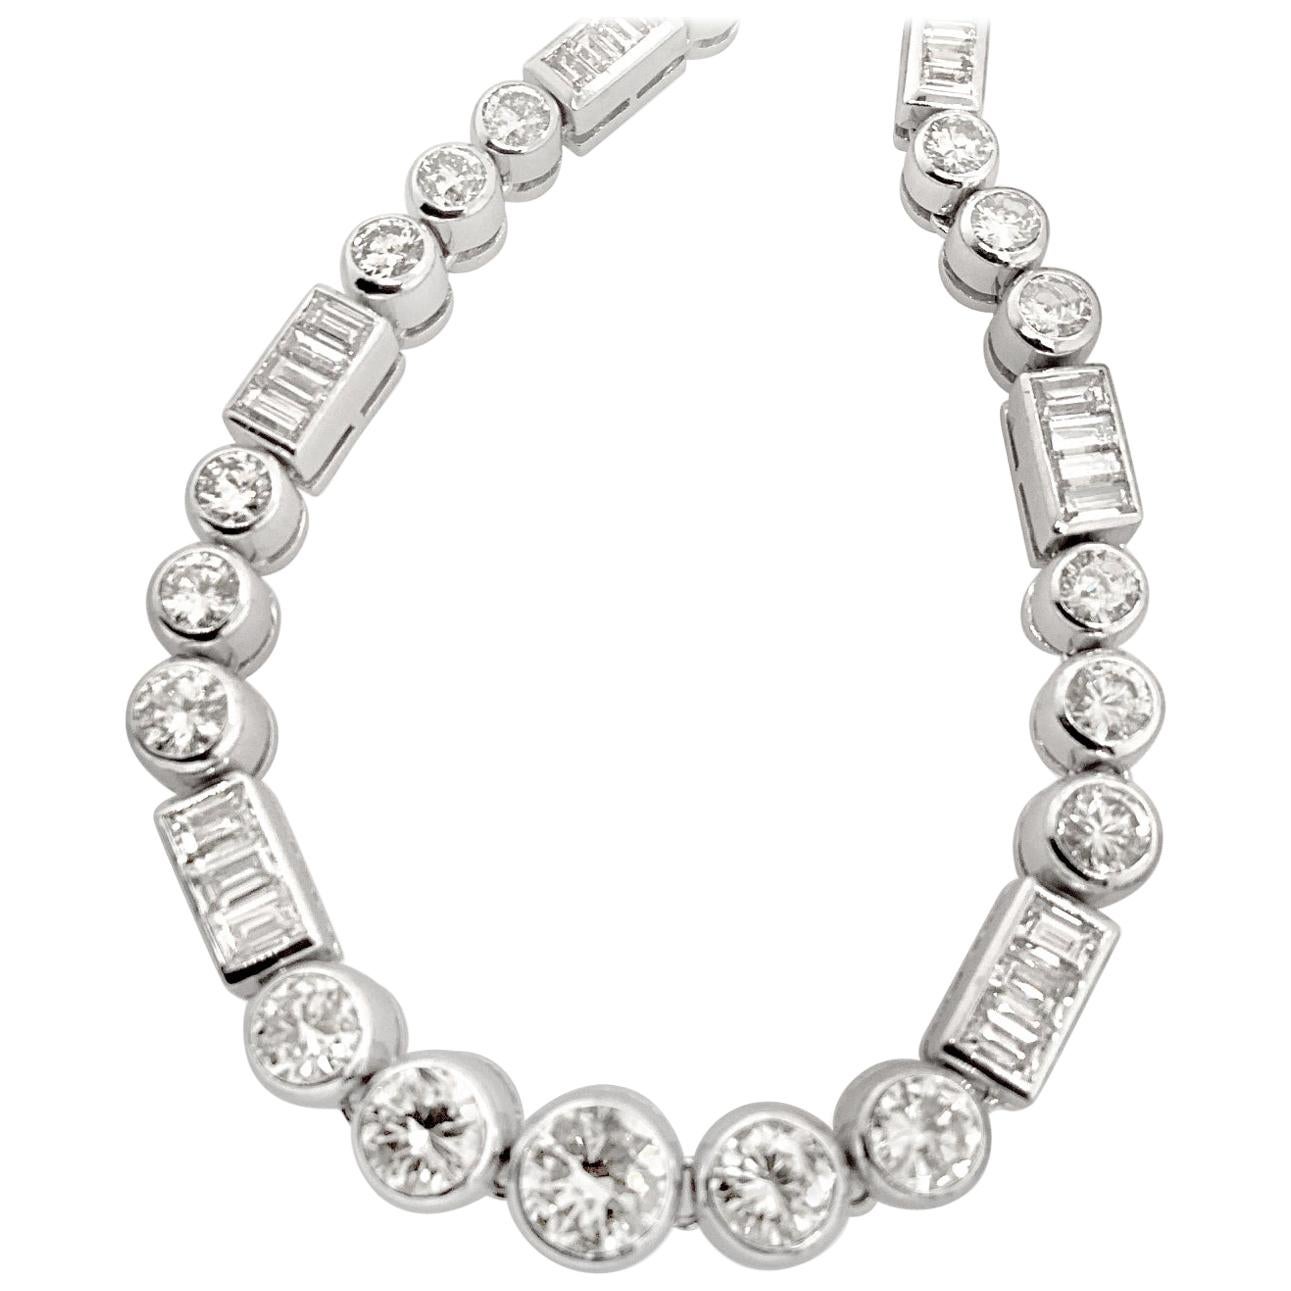 14.0 Carat 'total weight' Round and Baguette Diamond Necklace in Platinum